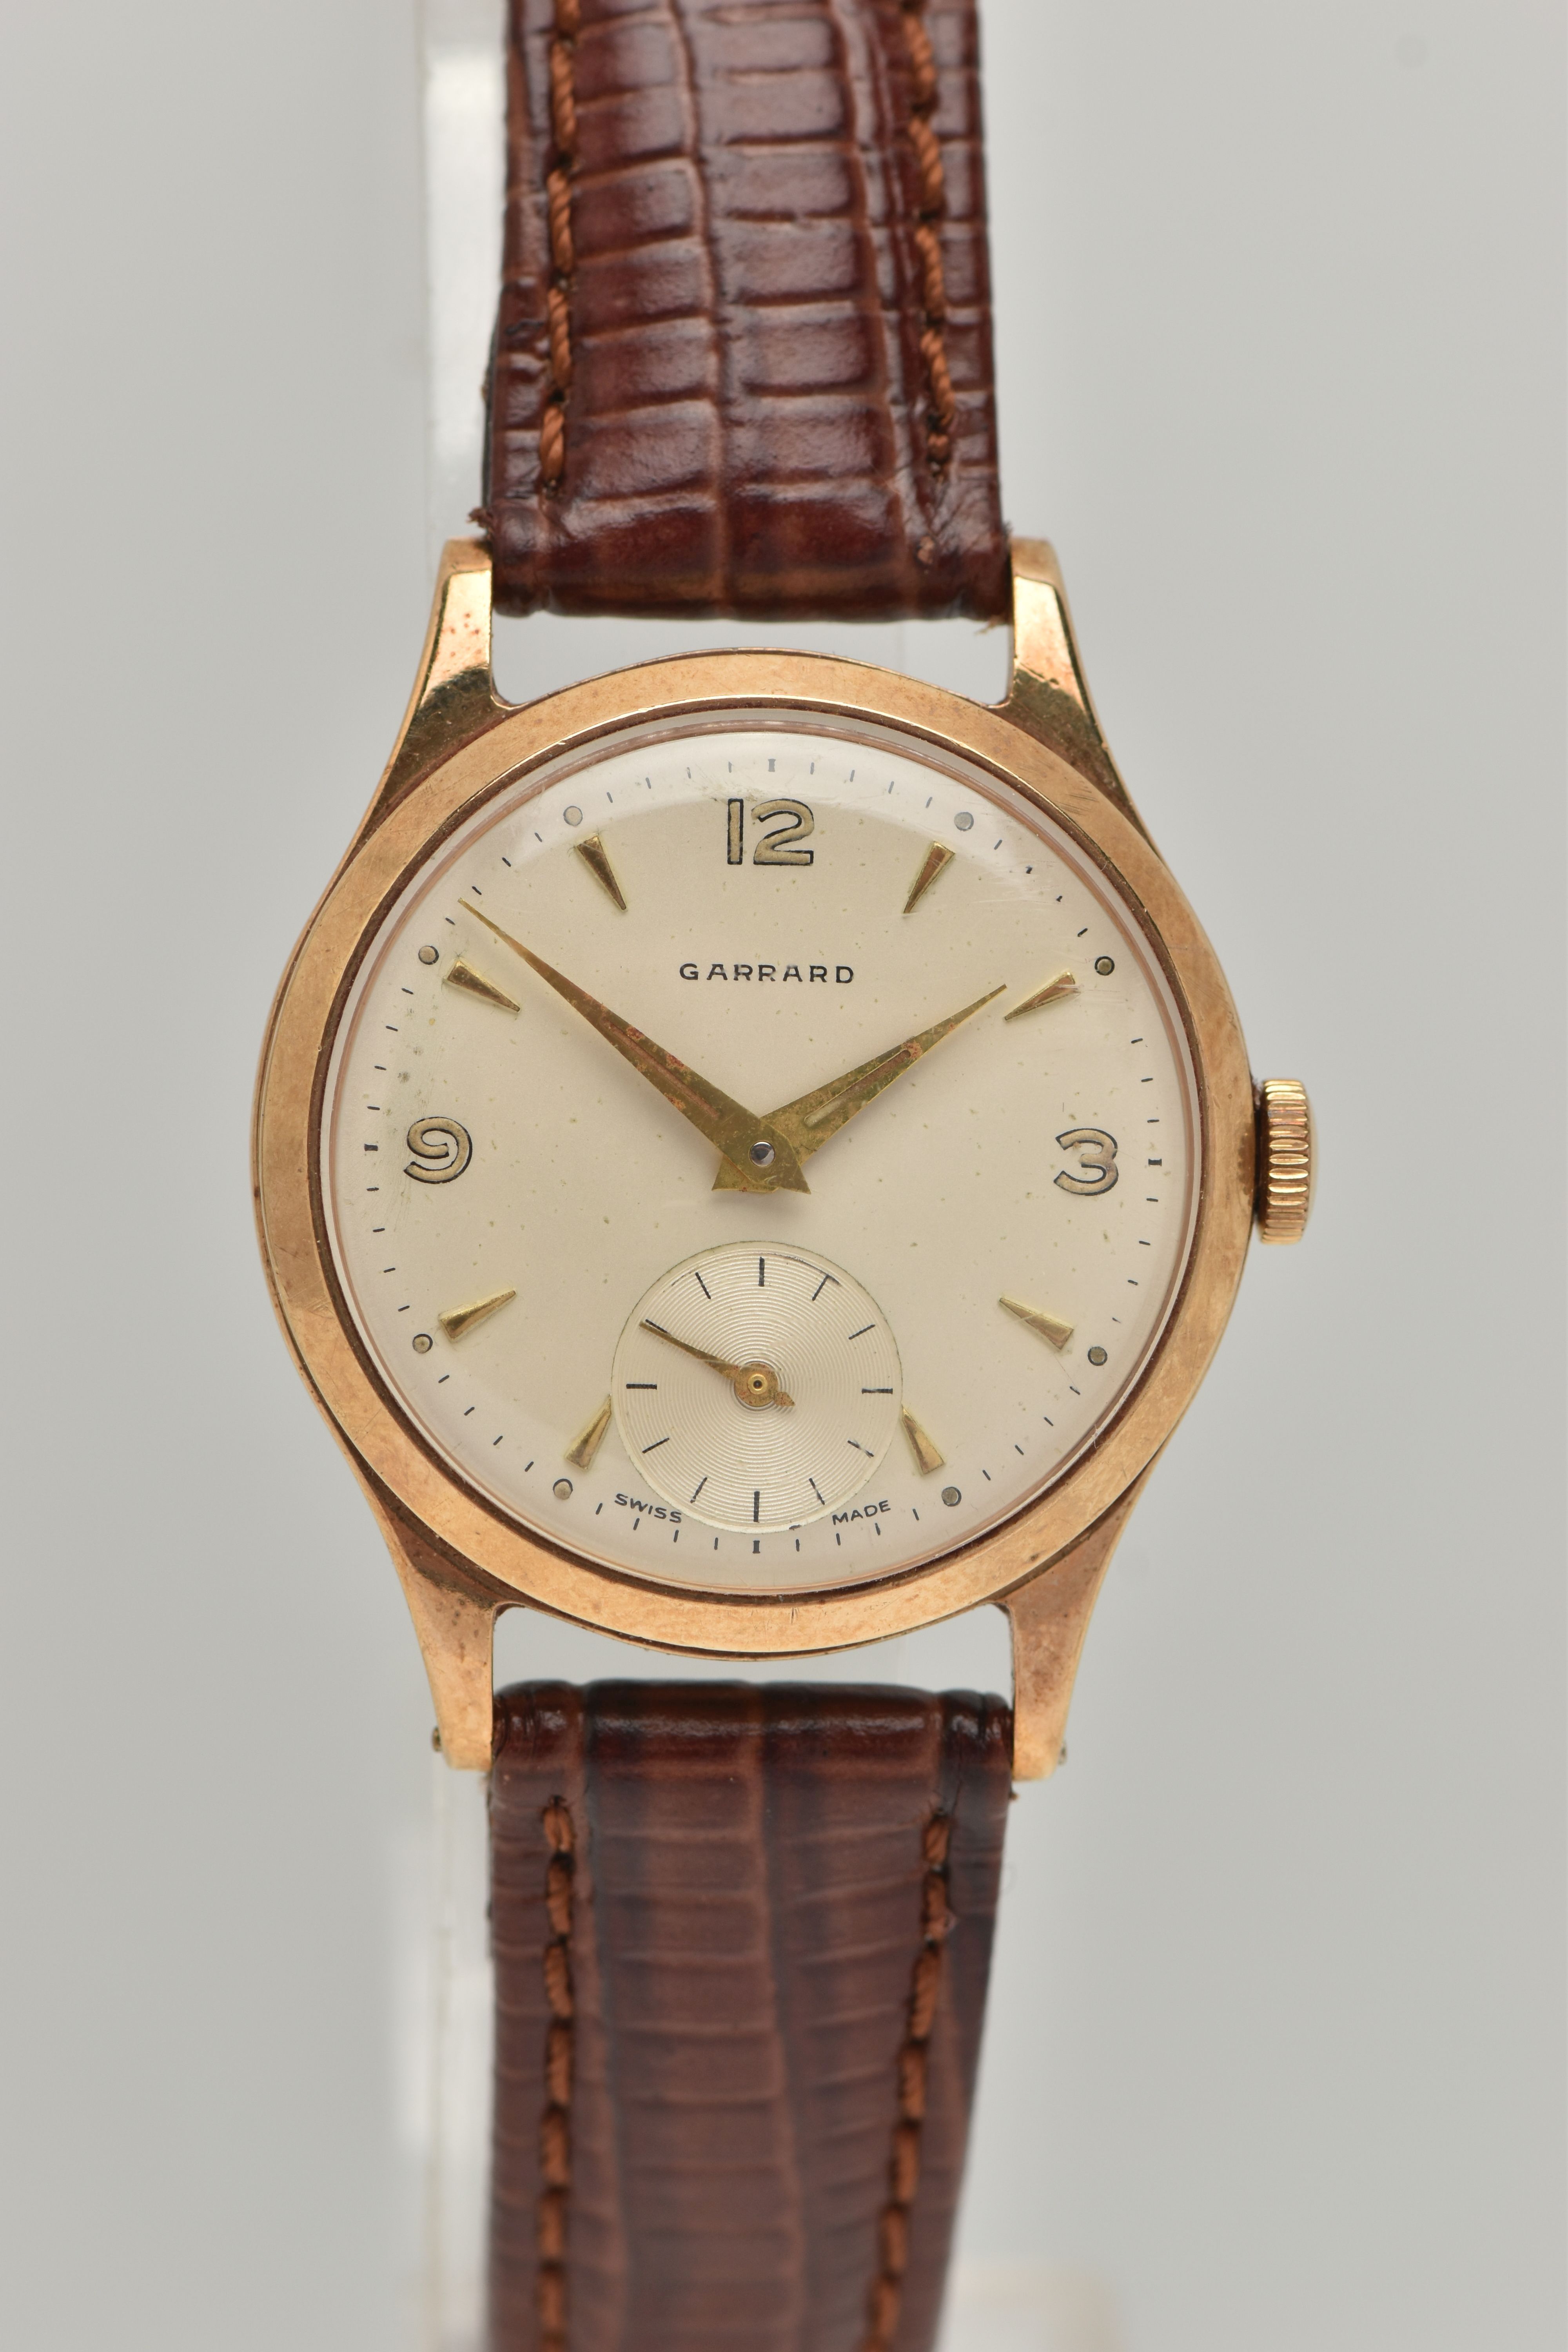 A GARRARD 9CT WRISTWATCH, the circular face with baton and Arabic numerals, a subsidiary seconds